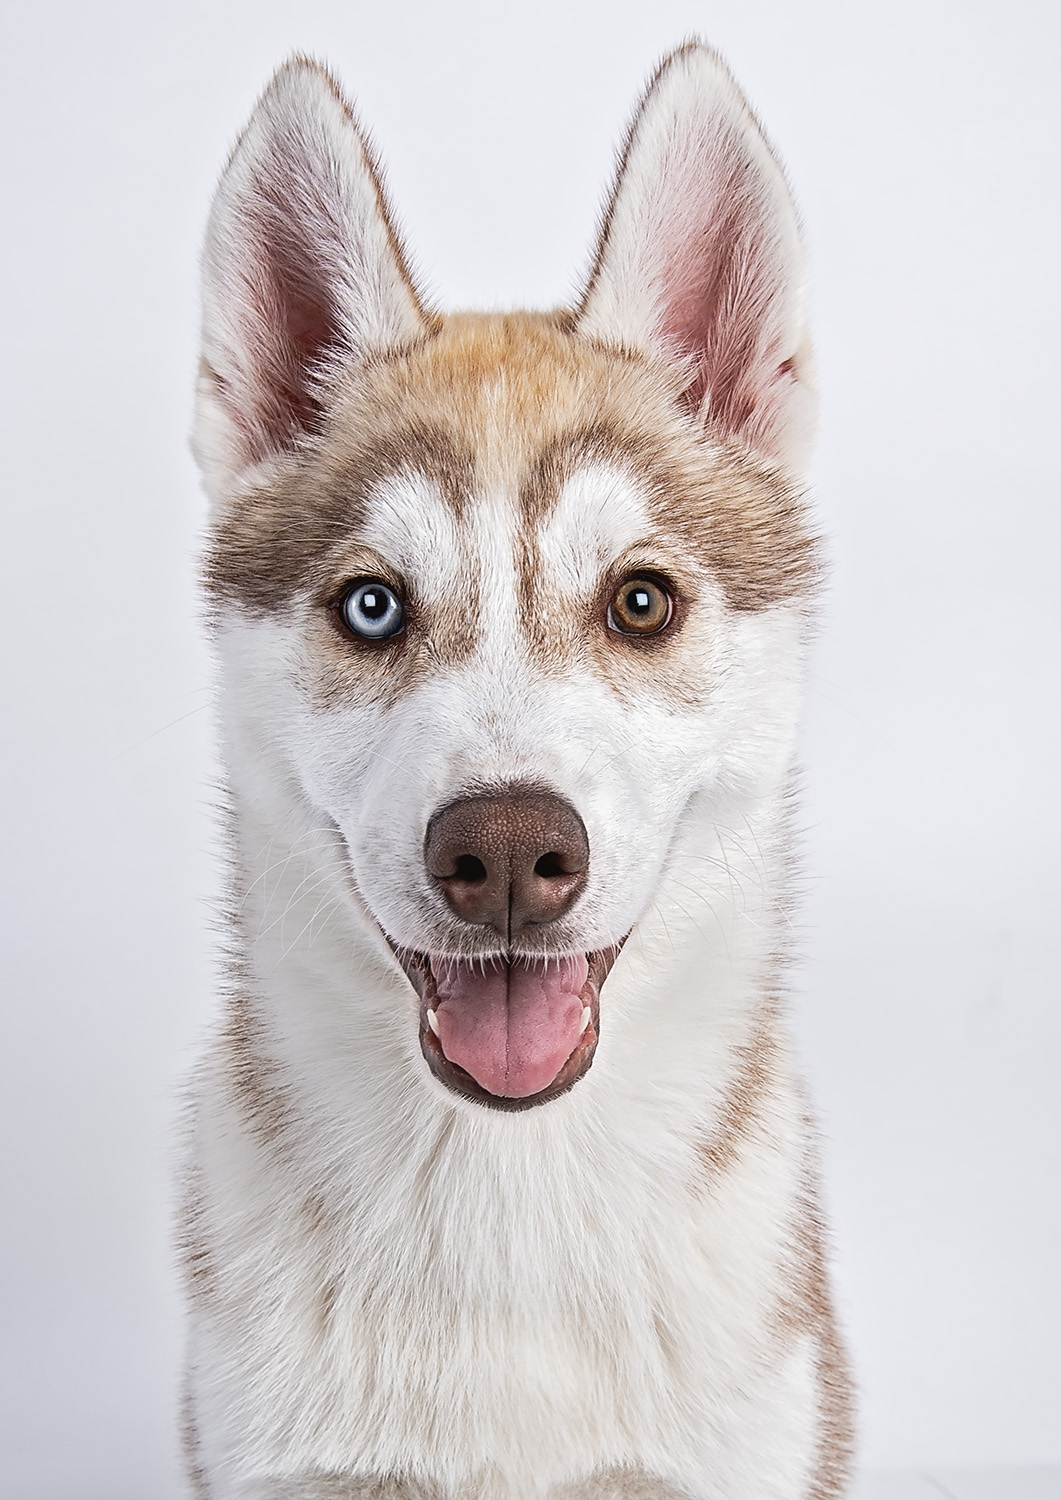 A close-up of a happy Husky with one blue eye and one brown eye. The dog's mouth is open in a smile, revealing its teeth. The plain white background highlights the dog's striking facial features and fur colours.